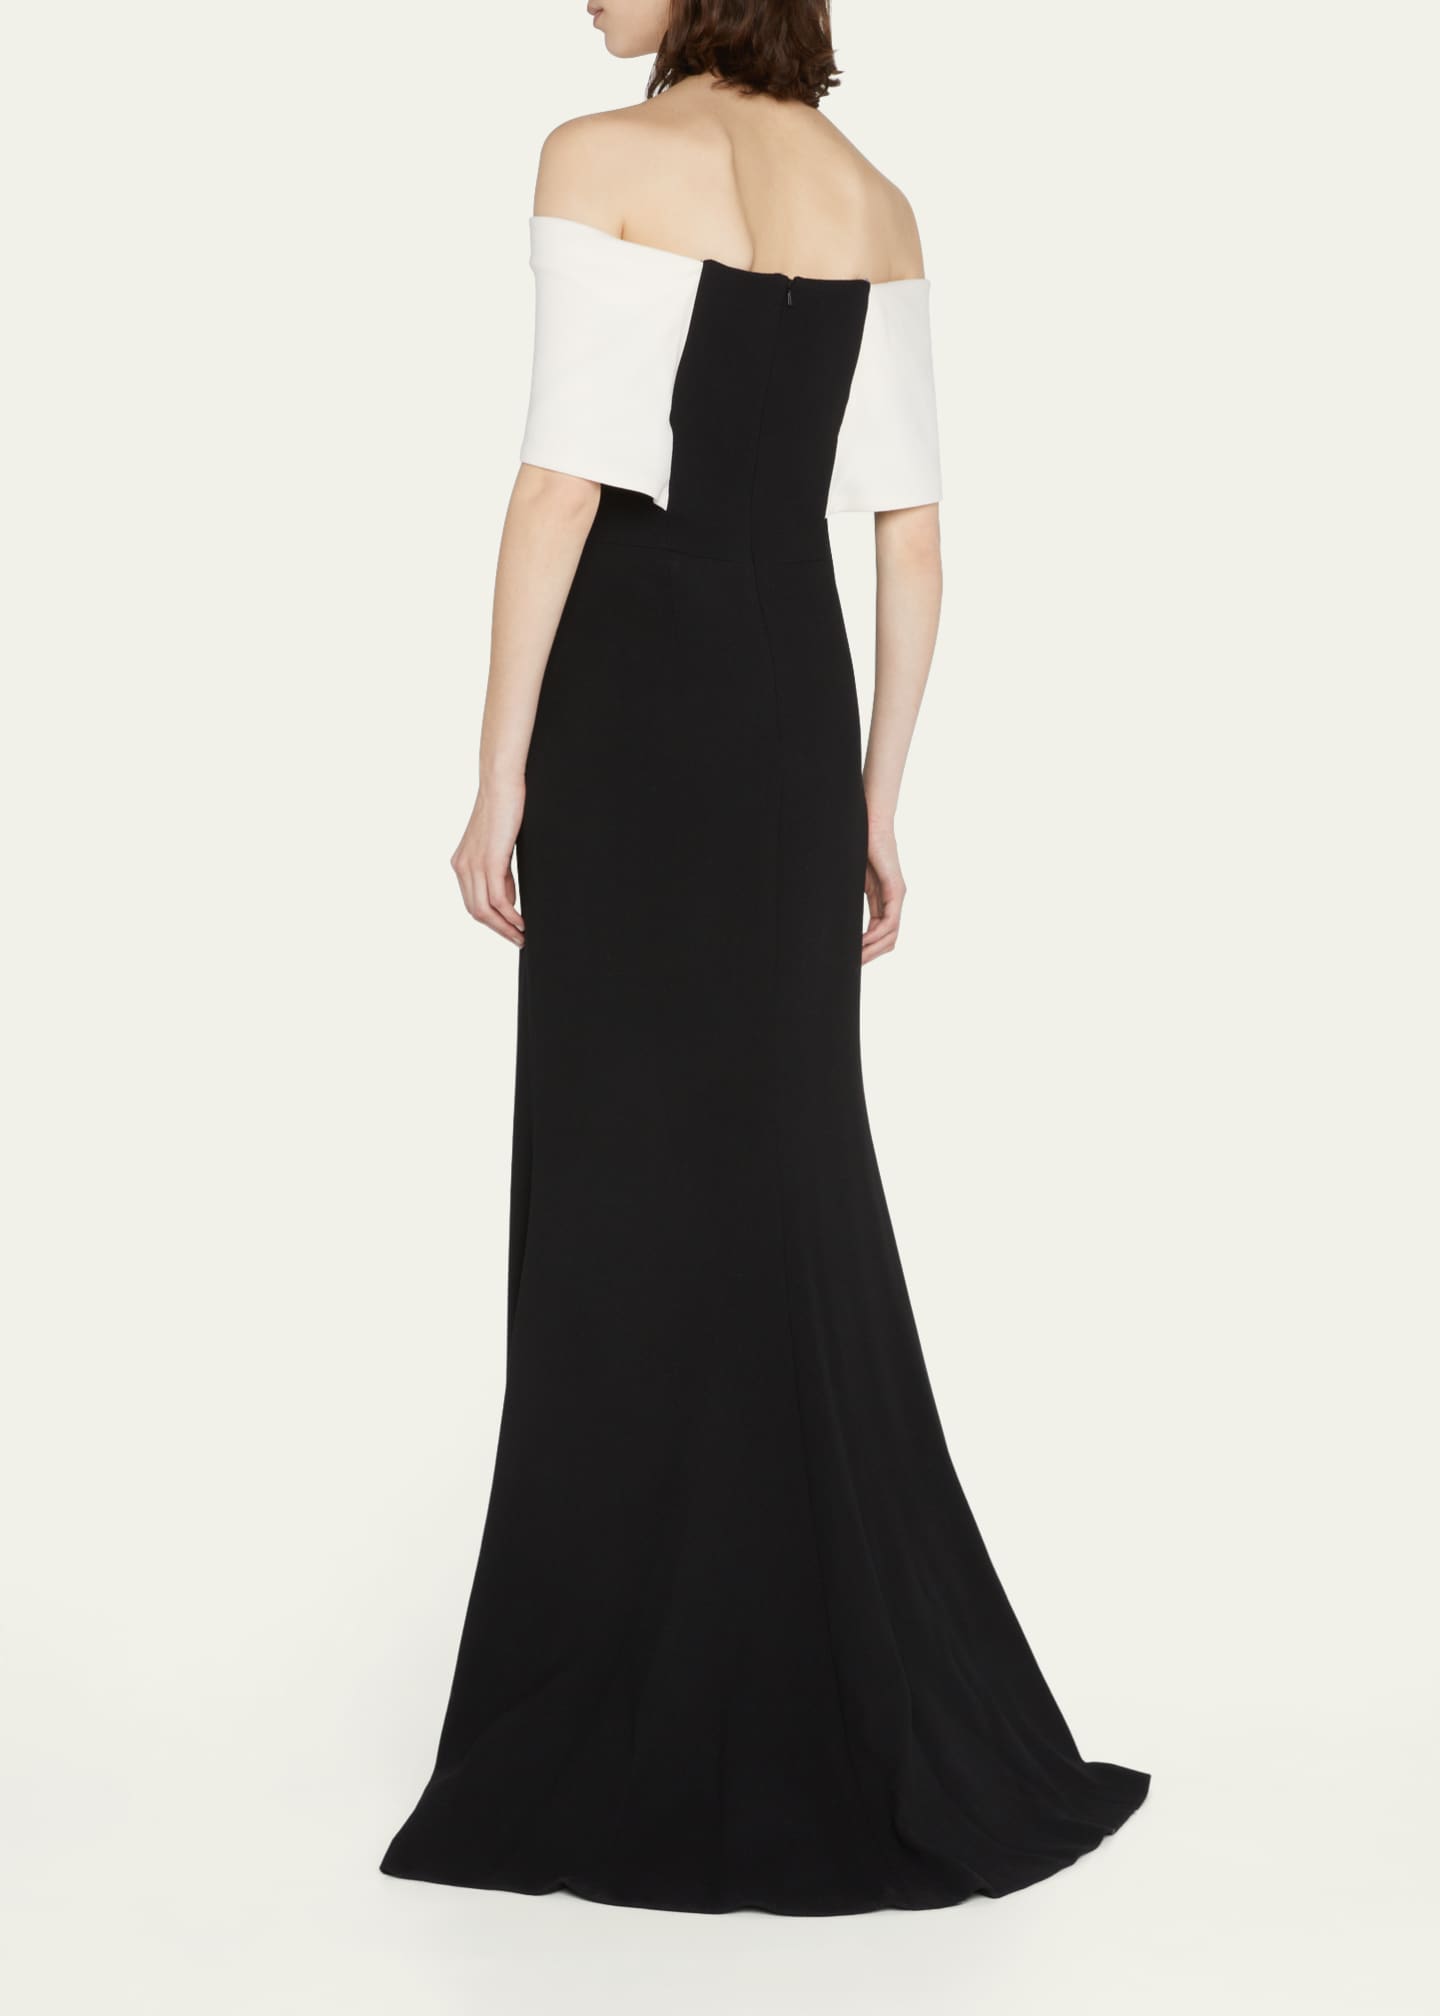 Lela Rose Off-the-Shoulder Two-Tone Gown - Bergdorf Goodman